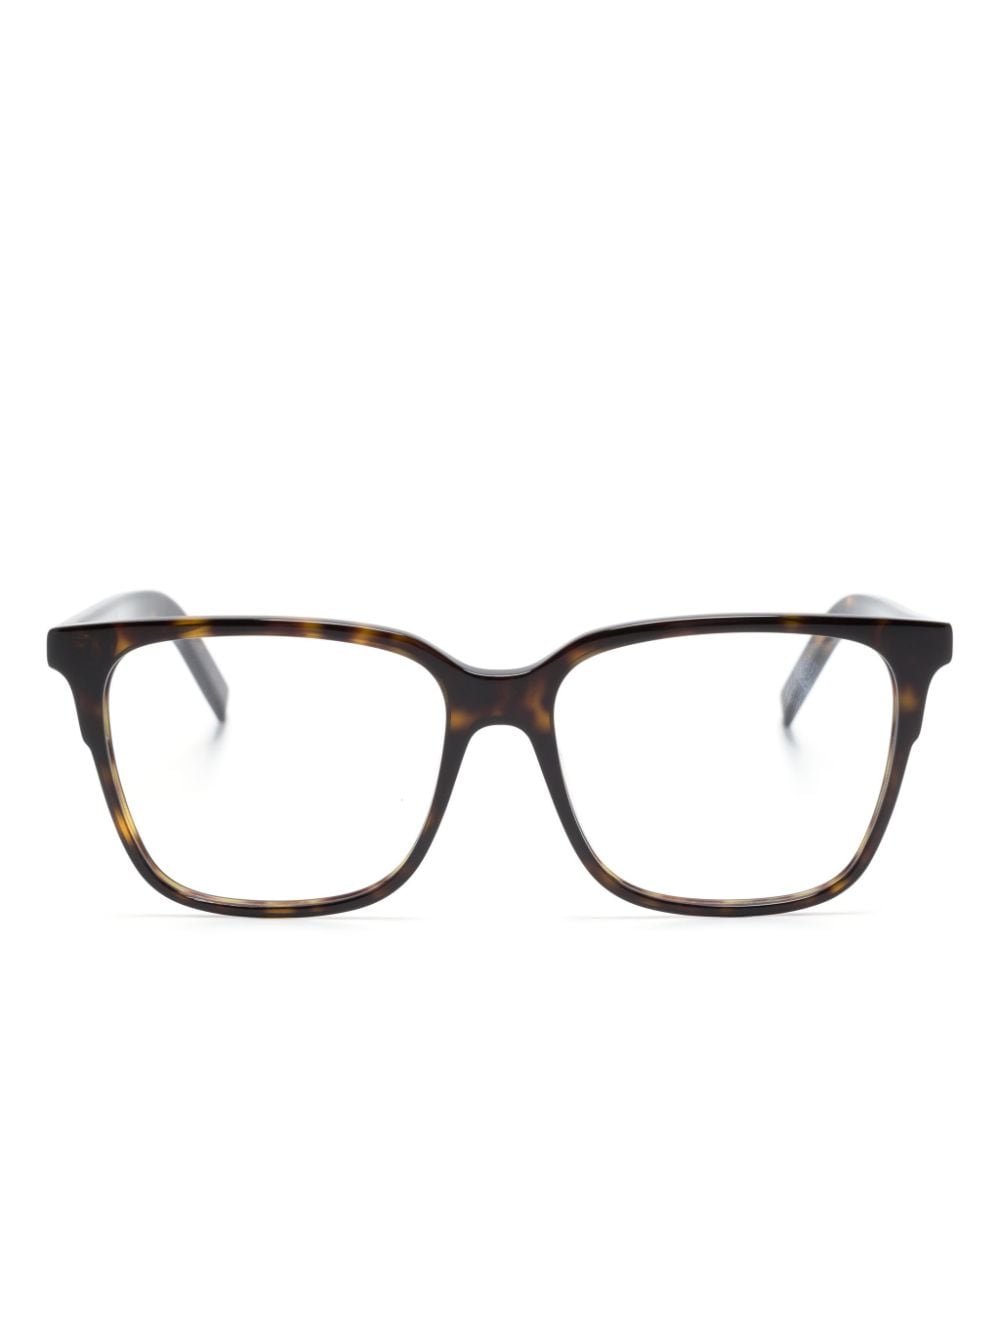 Givenchy Tortoiseshell Square-frame Glasses In Brown